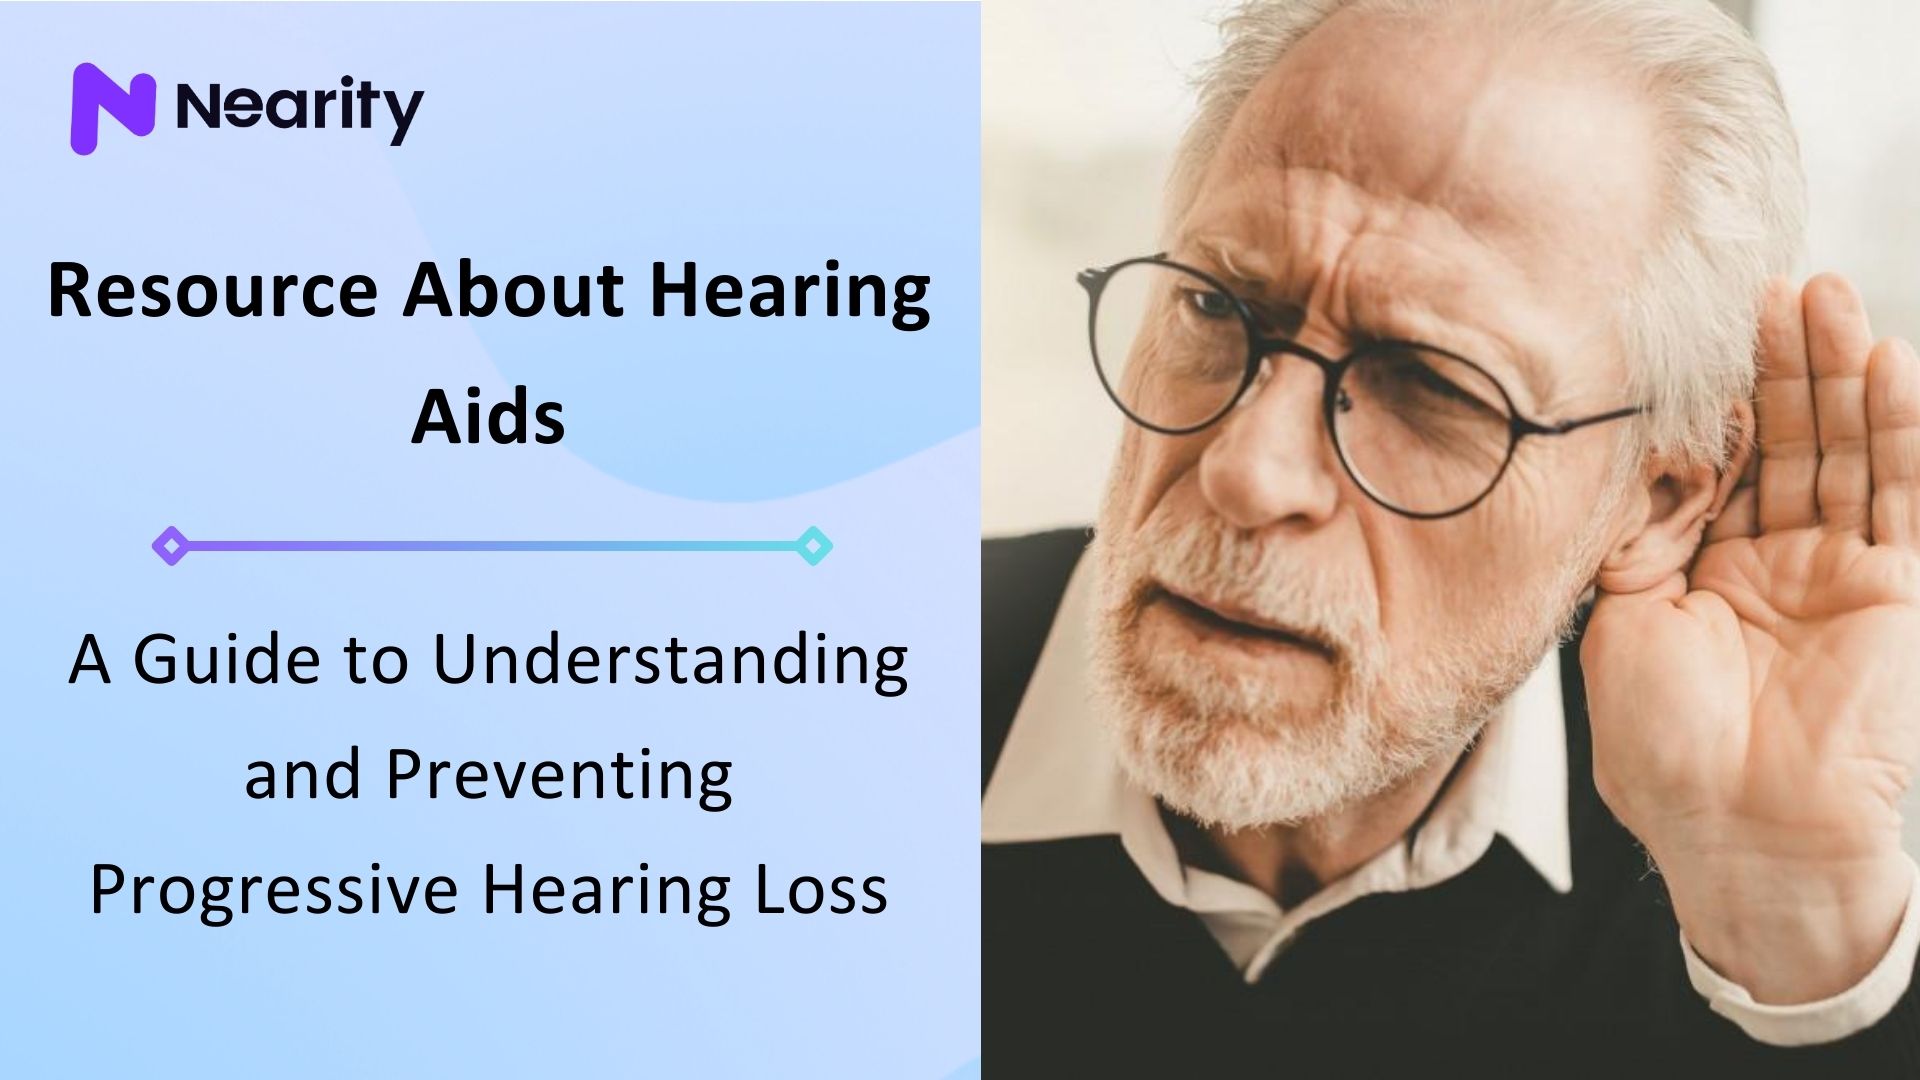 Protecting Your Hearing: A Guide to Understanding and Preventing Progressive Hearing Loss